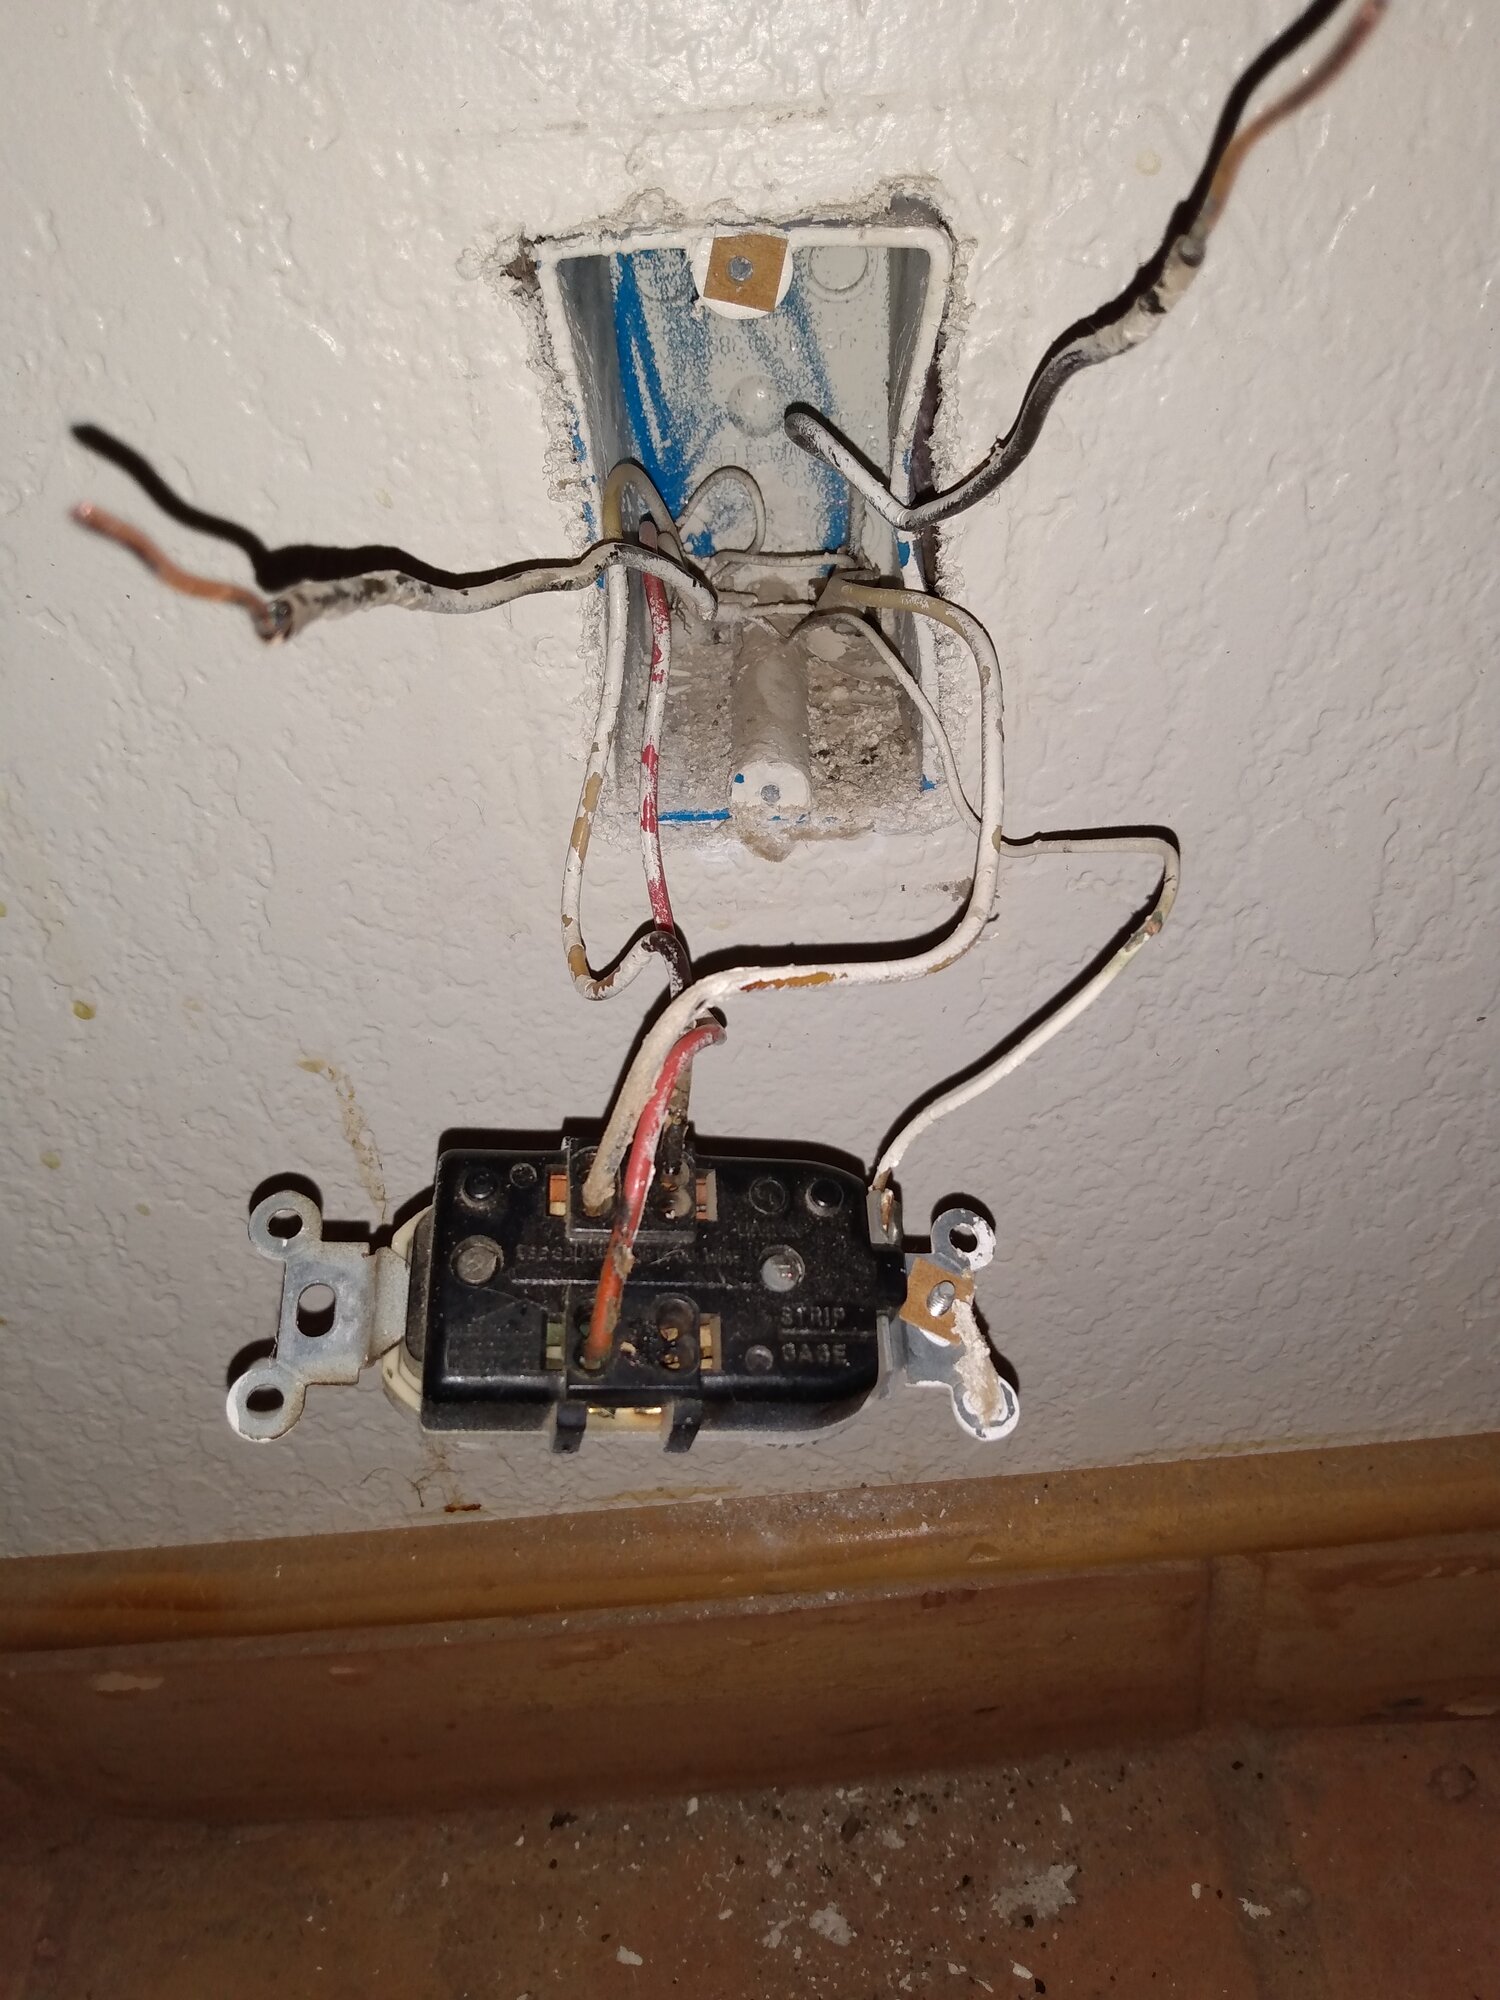 Switched Outlet Inside Box.jpg